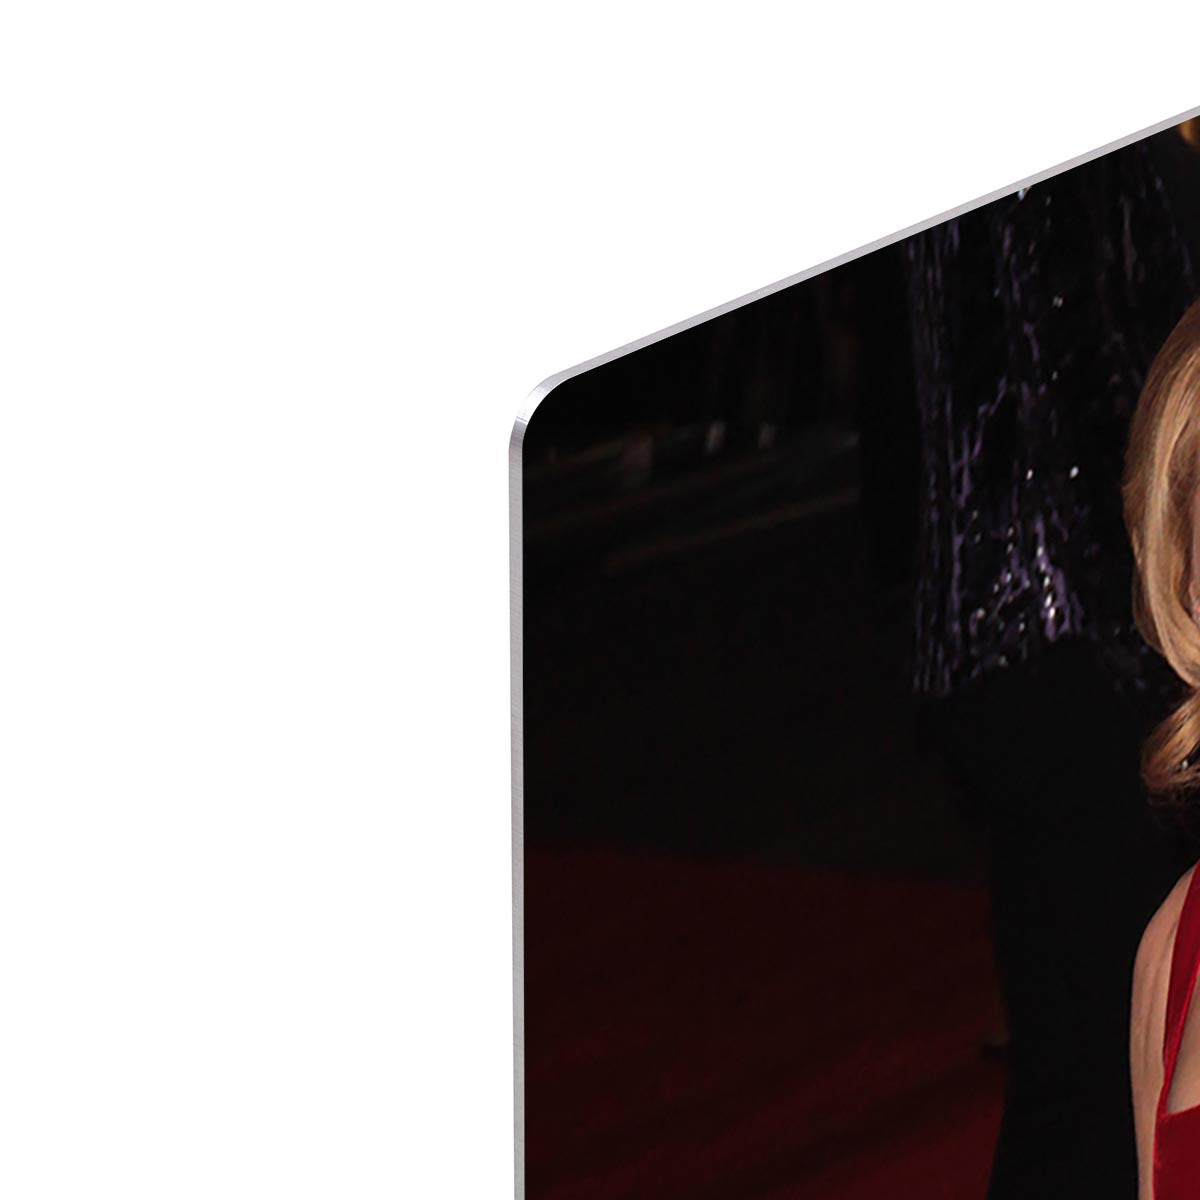 Gillian Anderson at the premiere of Les Miserables HD Metal Print